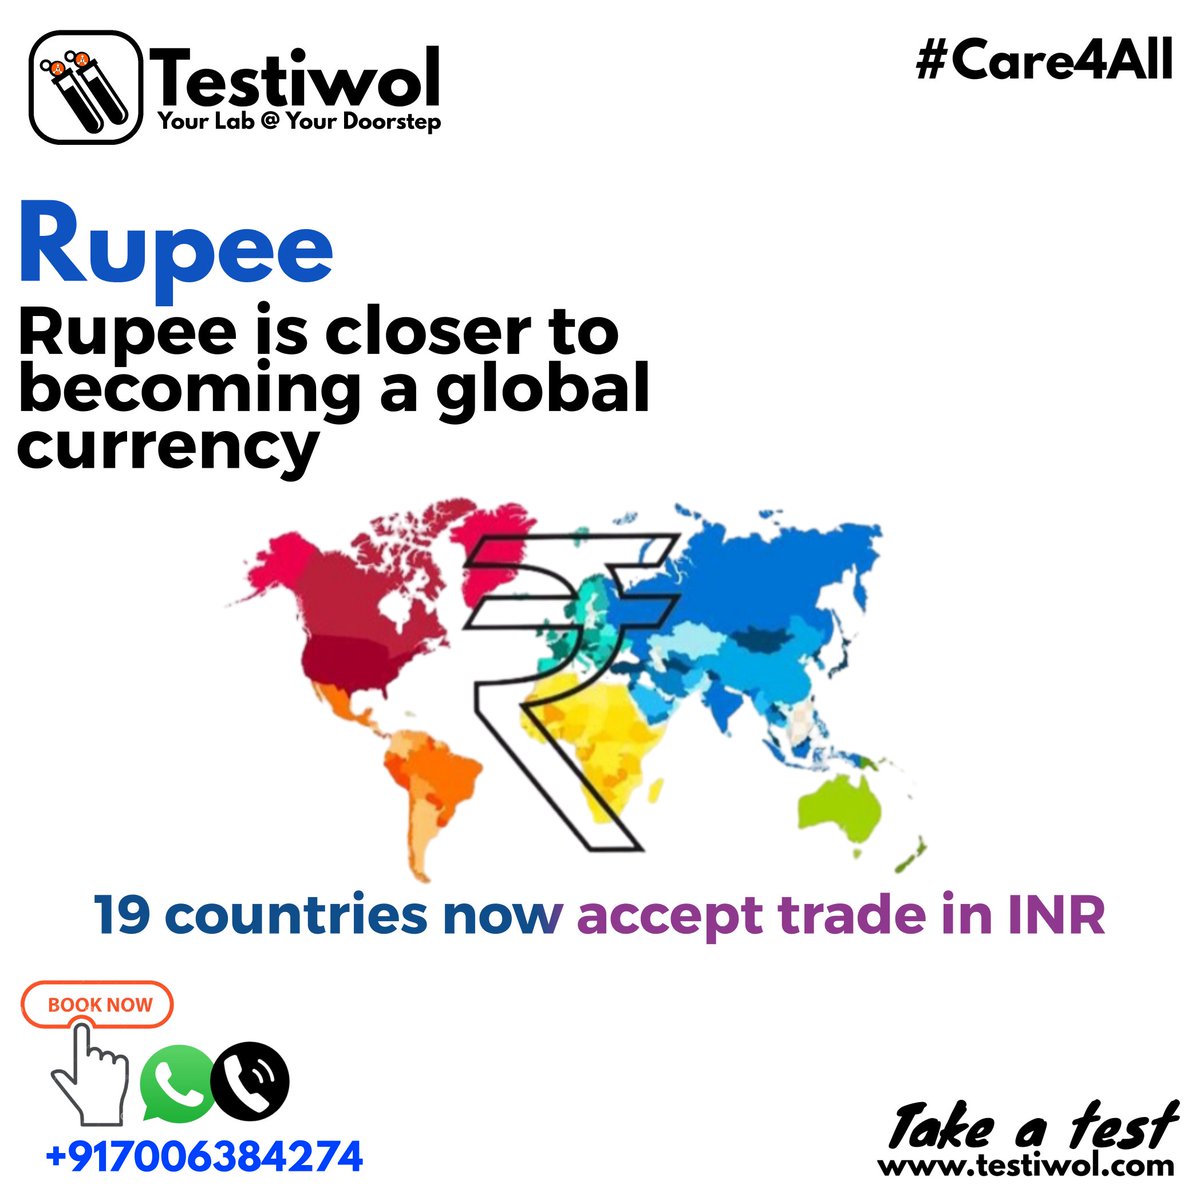 Rupee is closer to becoming a global  currency
19 countries now accept trade in INR
#rupee #rupeevsdollar
#testiwol #yourlabatyourdoorstep #Health #india #care #care4all #healthylifestyle #Healthykashmir #pathologyindia #pathologykmr #diagnostics #diagnosticservices  @testiwol